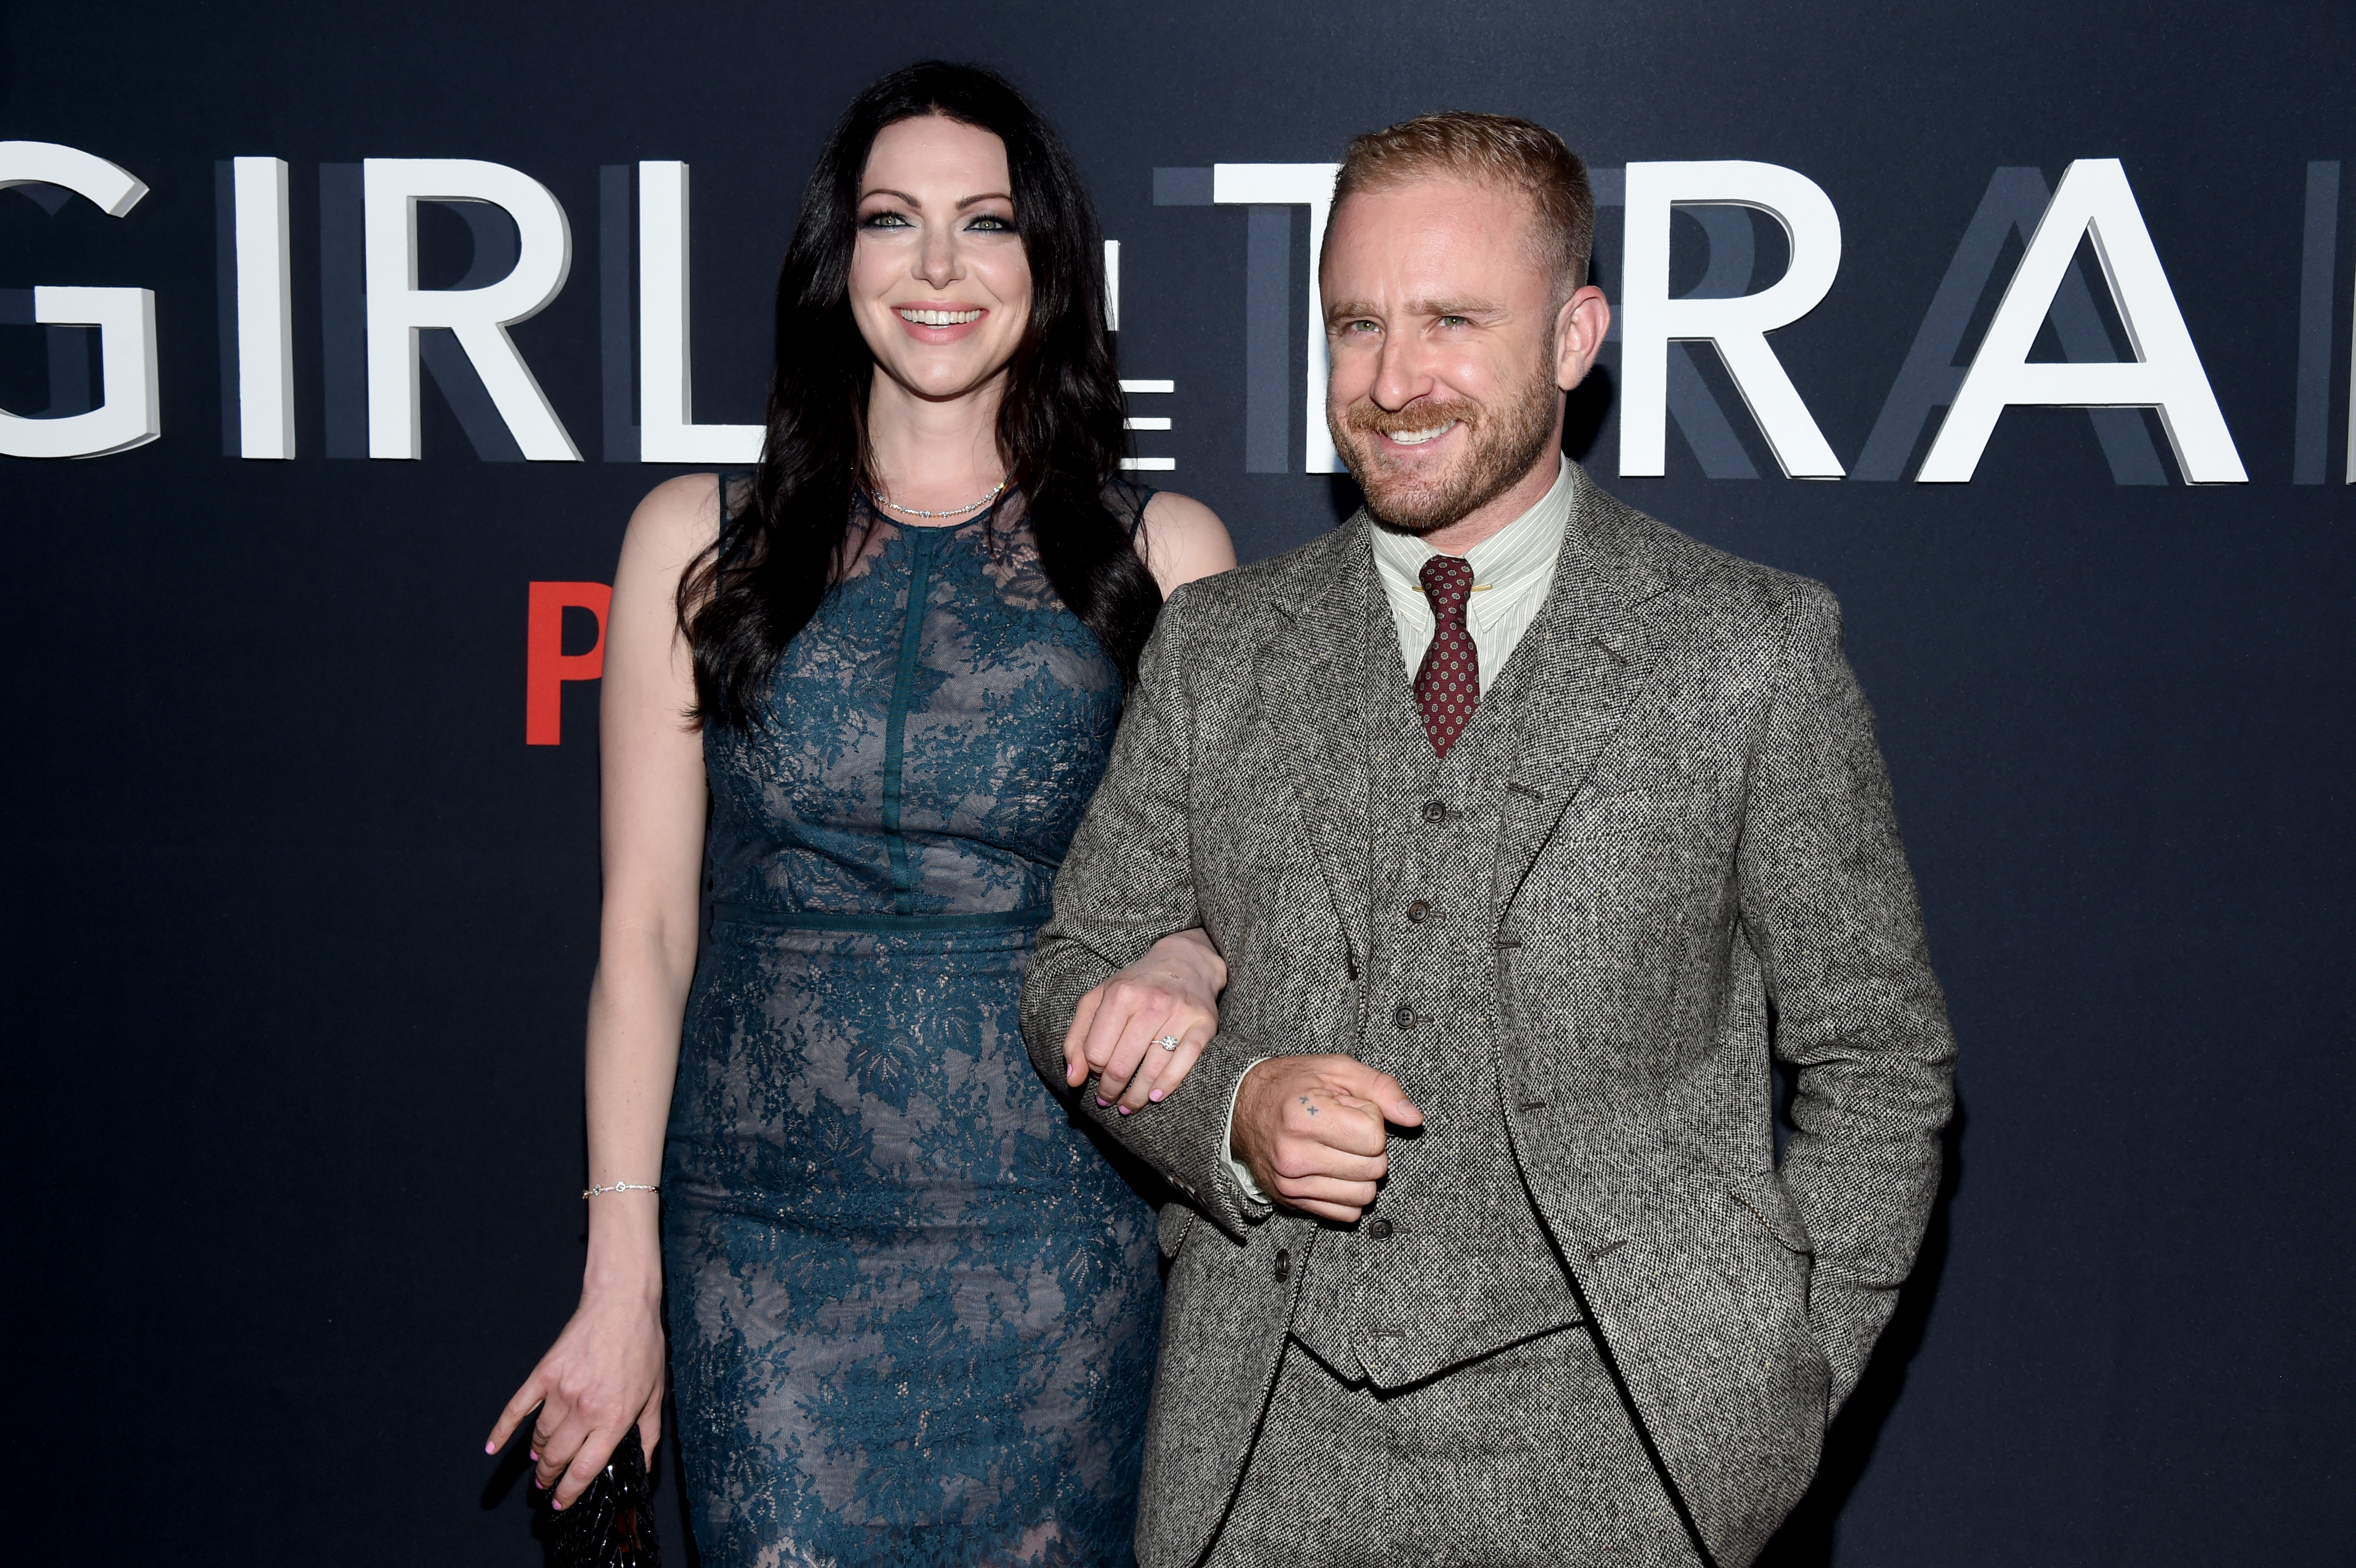 Laura Prepon and  Ben Foster at the 'The Girl on the Train' film premiere, New York, on October 4, 2016. Source: Getty Images